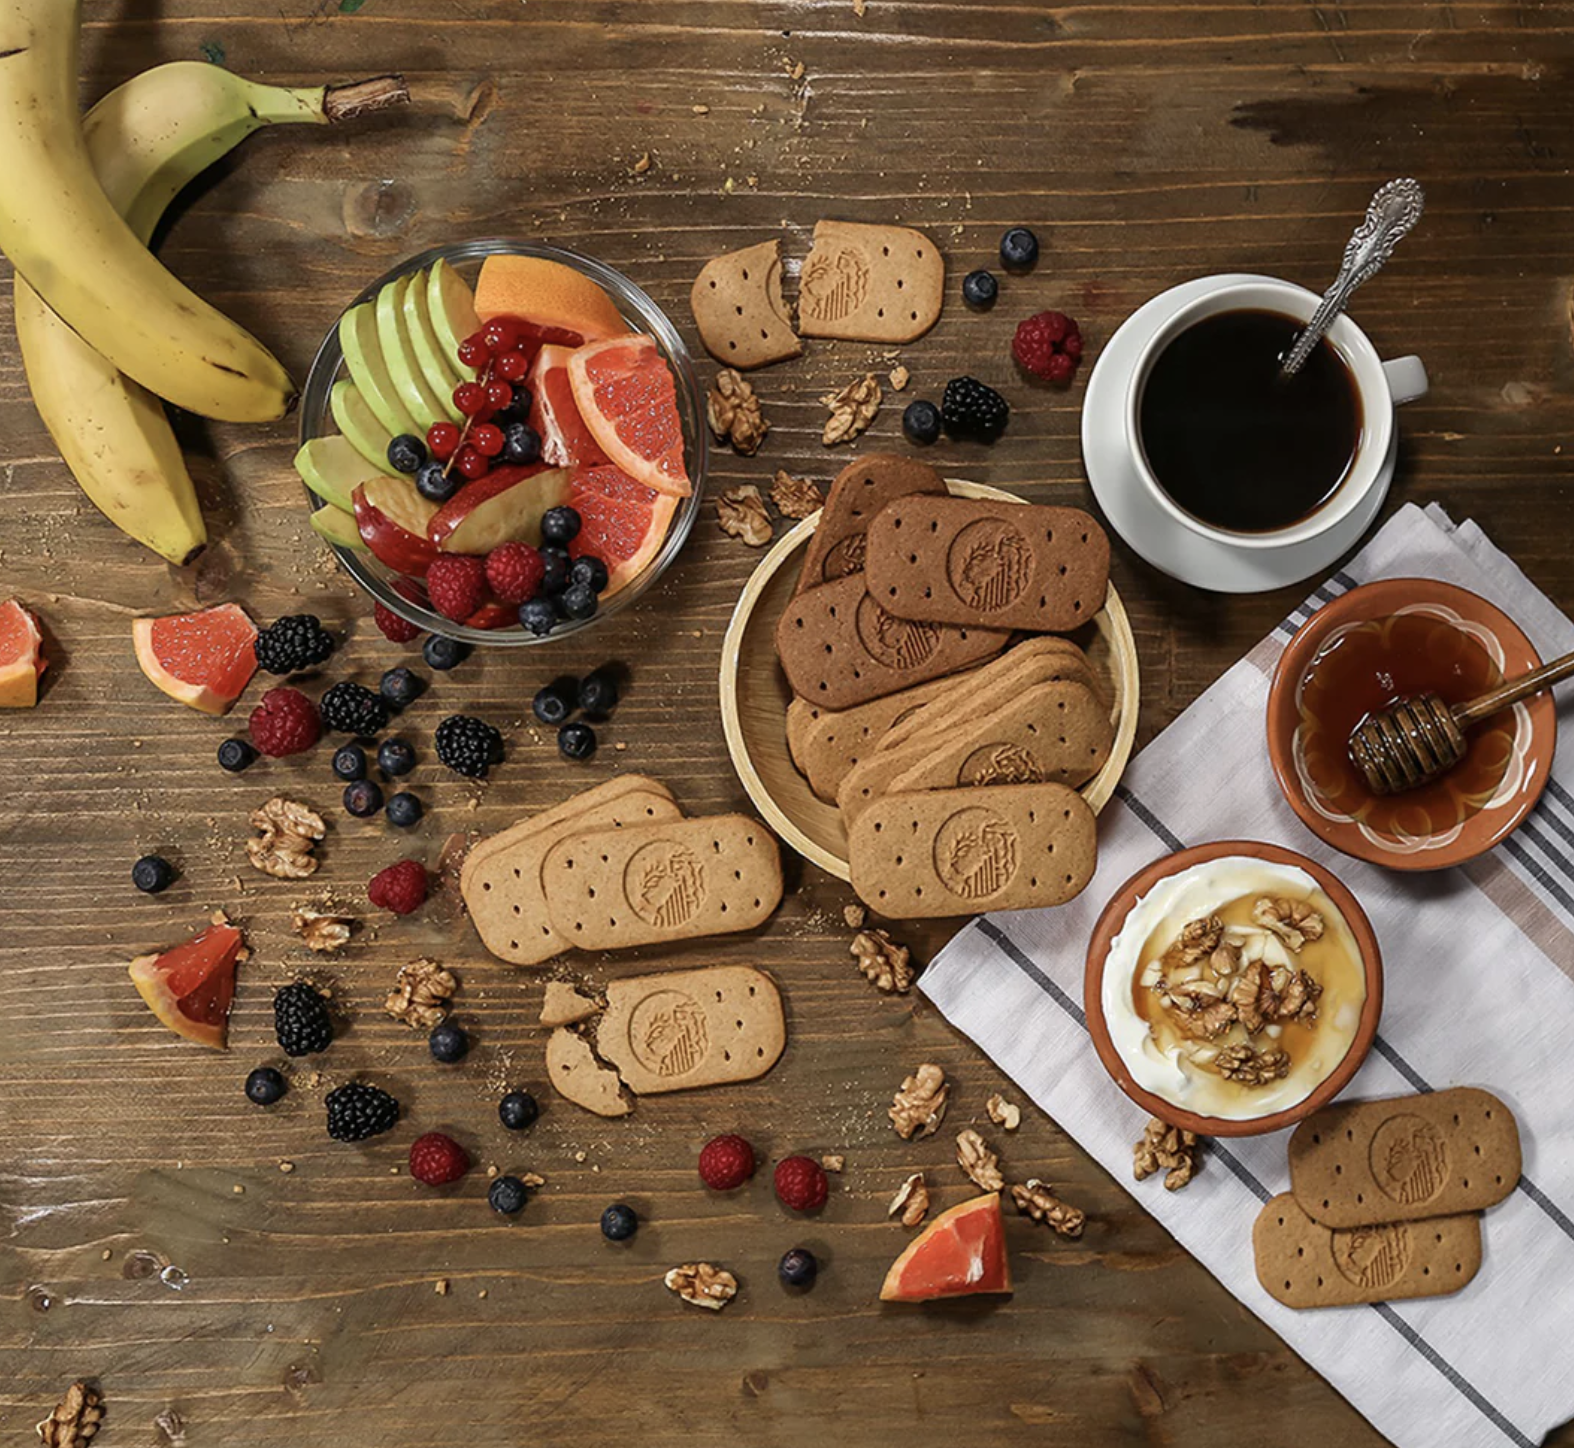 Olyra Foods biscuits surrounded by dippings and fruits.